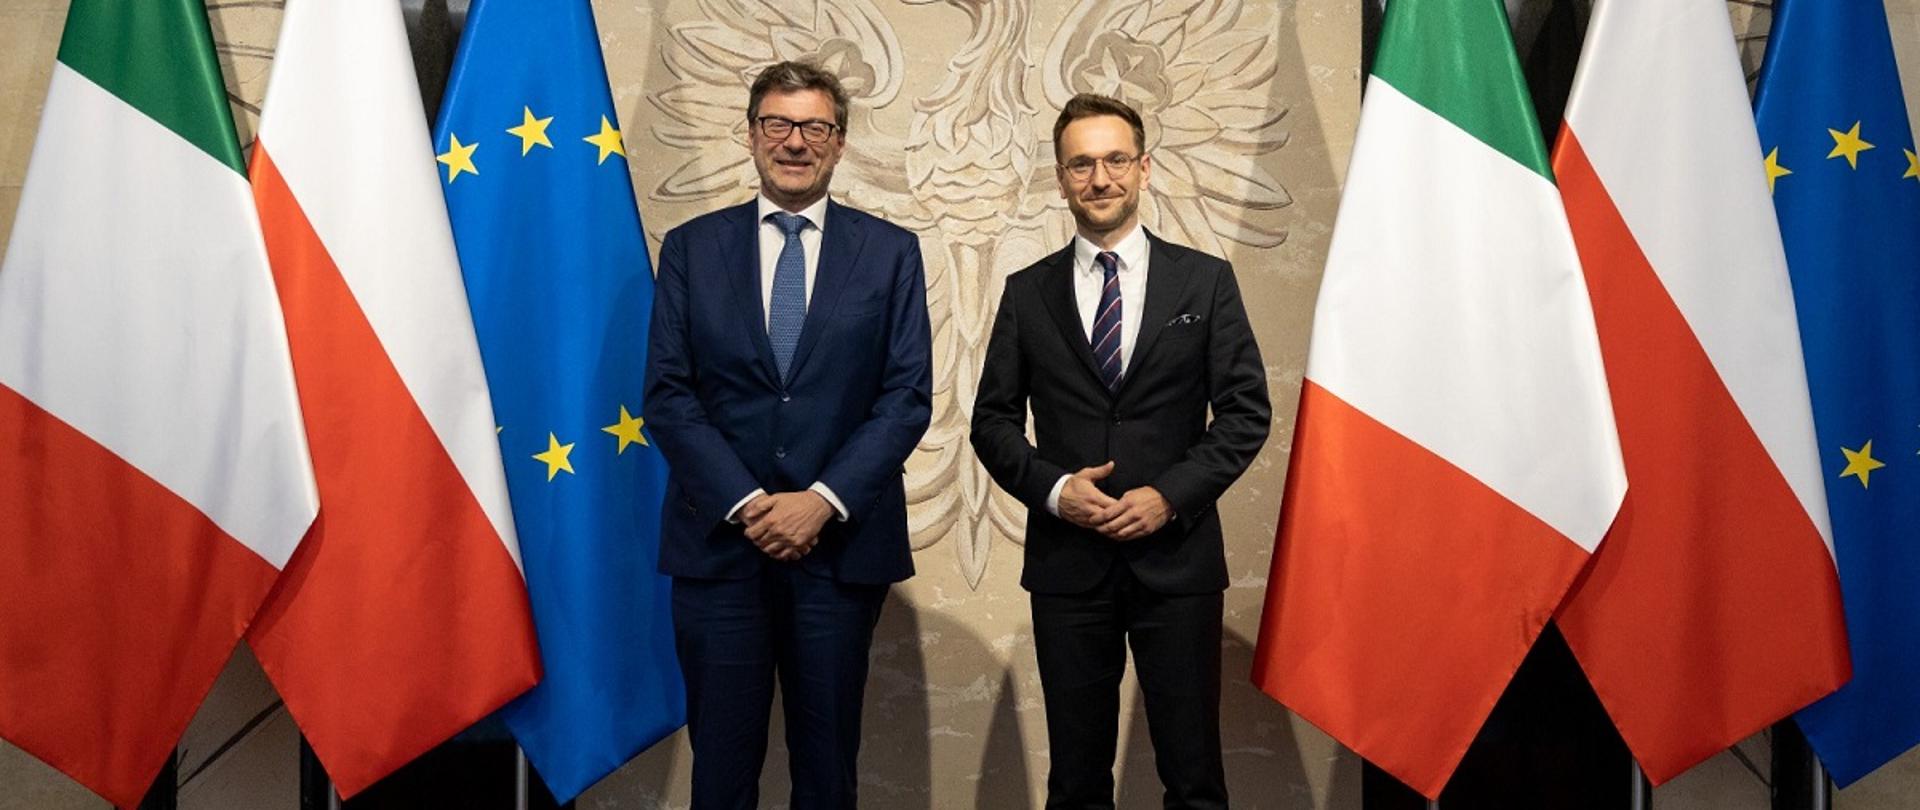 Minister of Economic Development and Technology Waldemar Buda and the Minister of Economic Development of the Republic of Italy Giancarlo Giorgetti